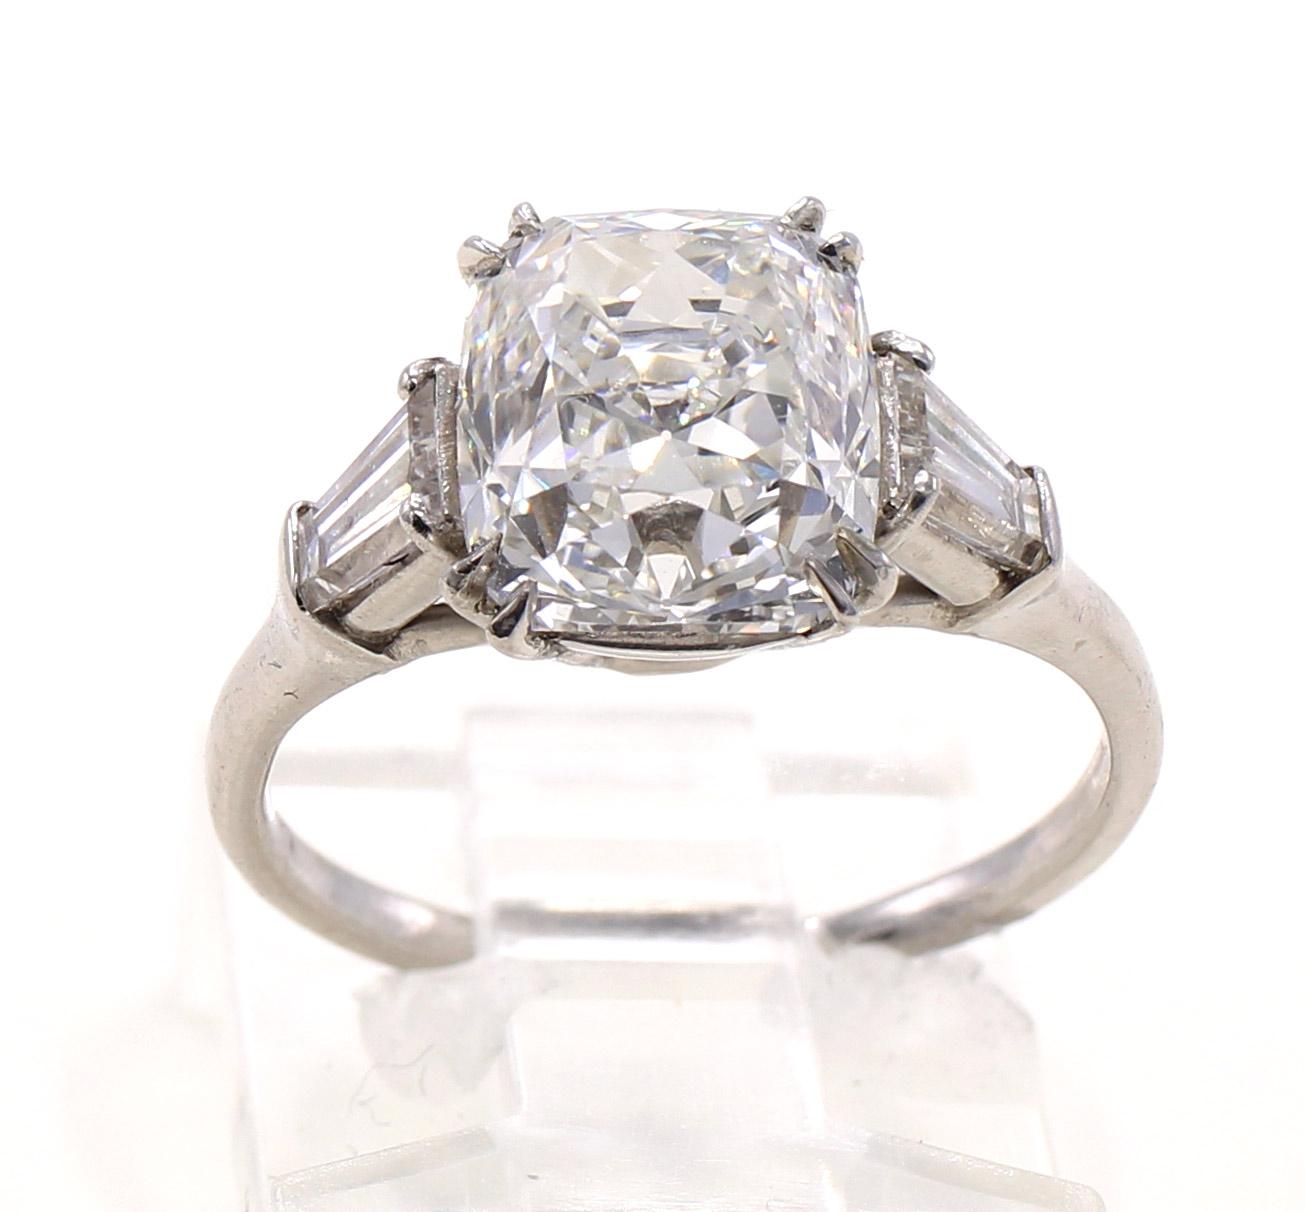 A gorgeous antique cut lively antique cut cushion brilliant weighing 3.11 carats is the centerpiece of this platinum baguette diamond engagement ring. This diamond is full of fire and sparkle due to it's amazing cut and faceting. The true antique